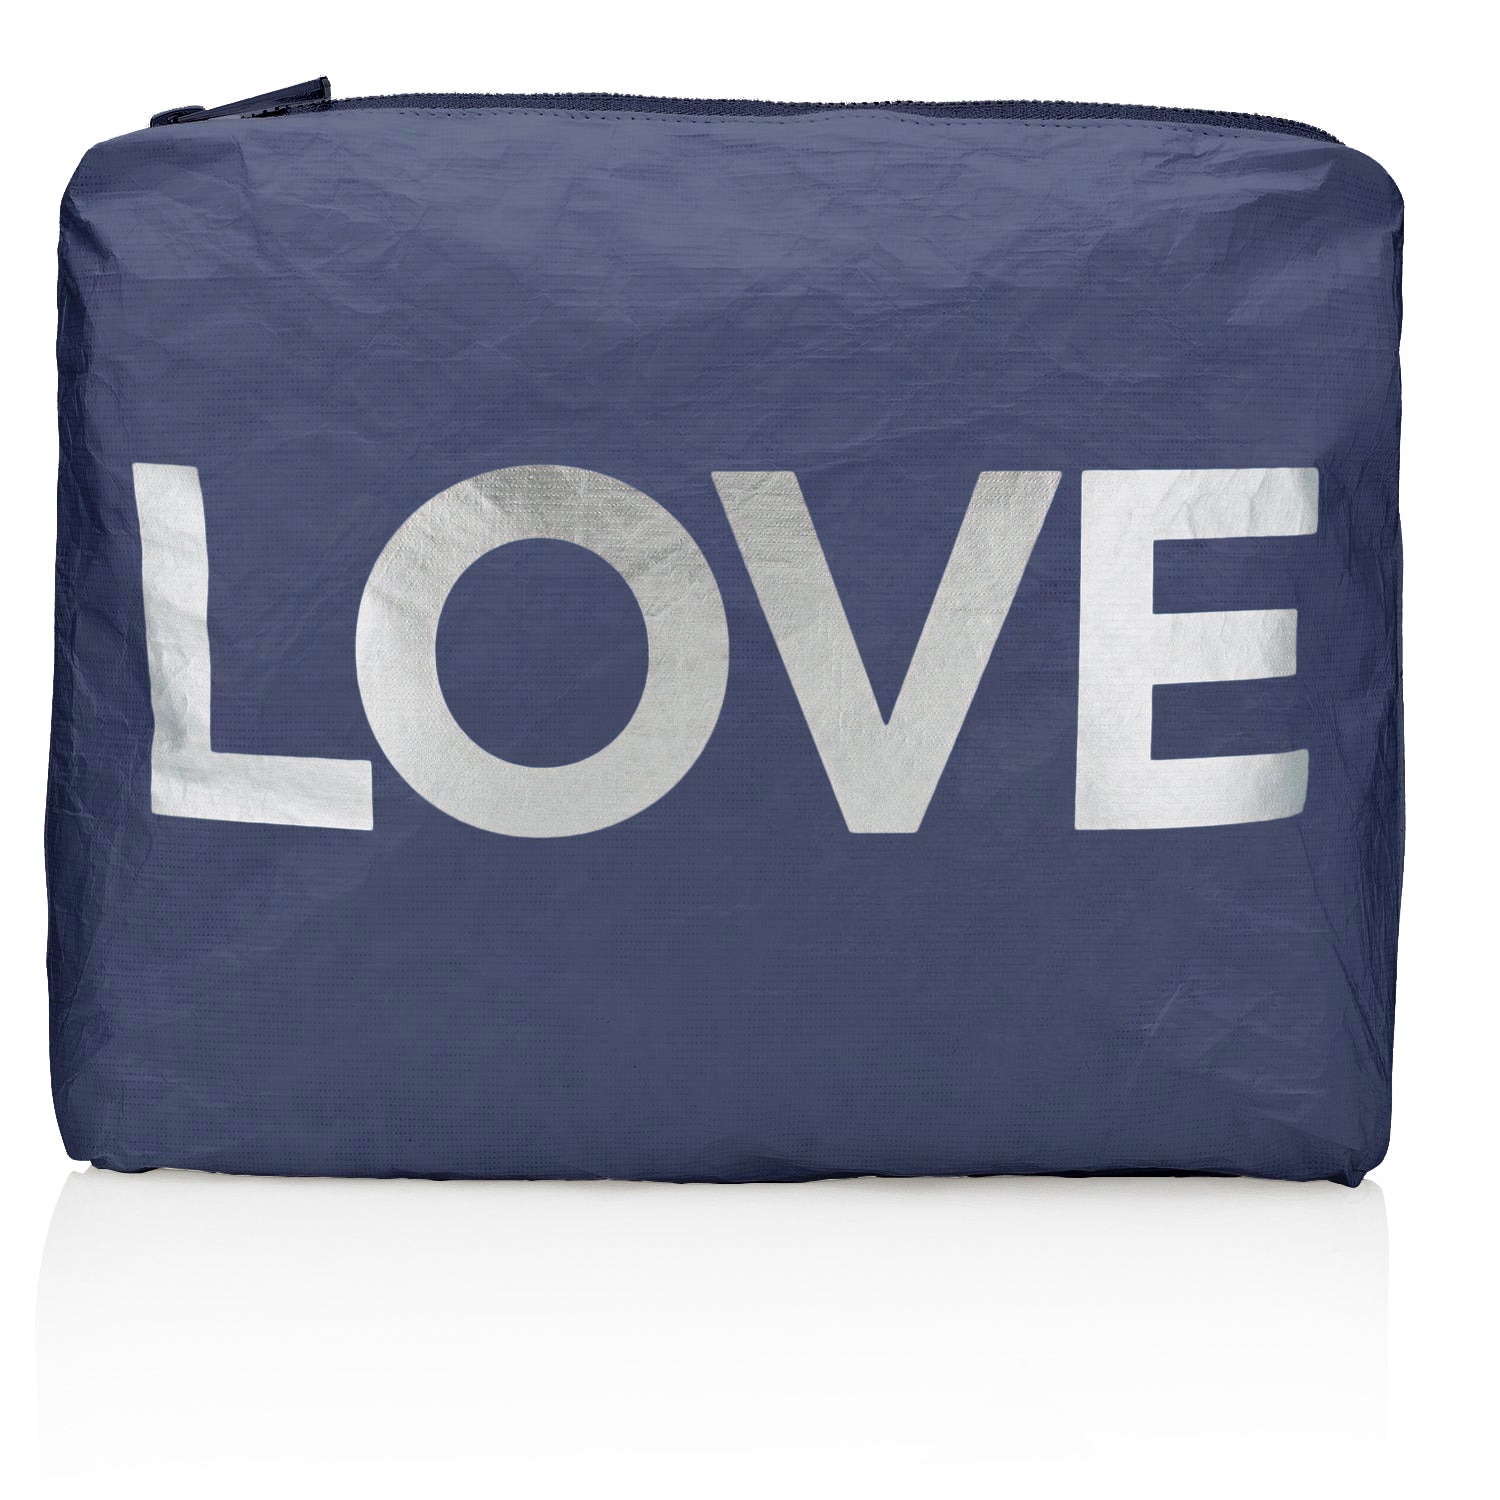 Medium Zipper Pack in Shimmer Navy Blue with Silver "LOVE"